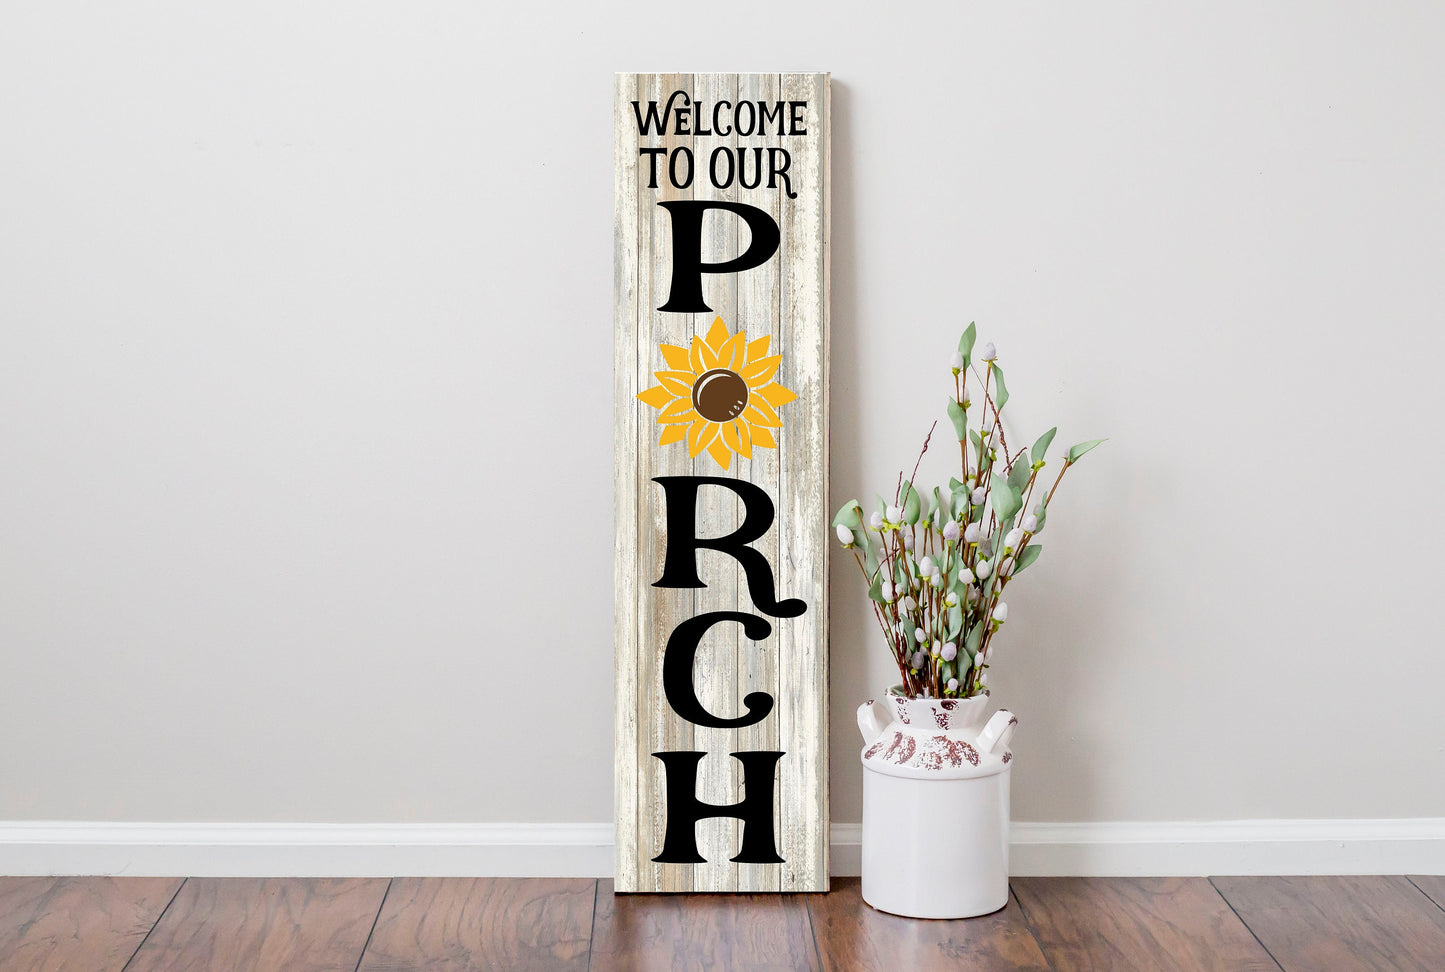 24 Inch (2 Foot Tall) Sunflower Welcome to Our Porch Vertical Wood Print Sign